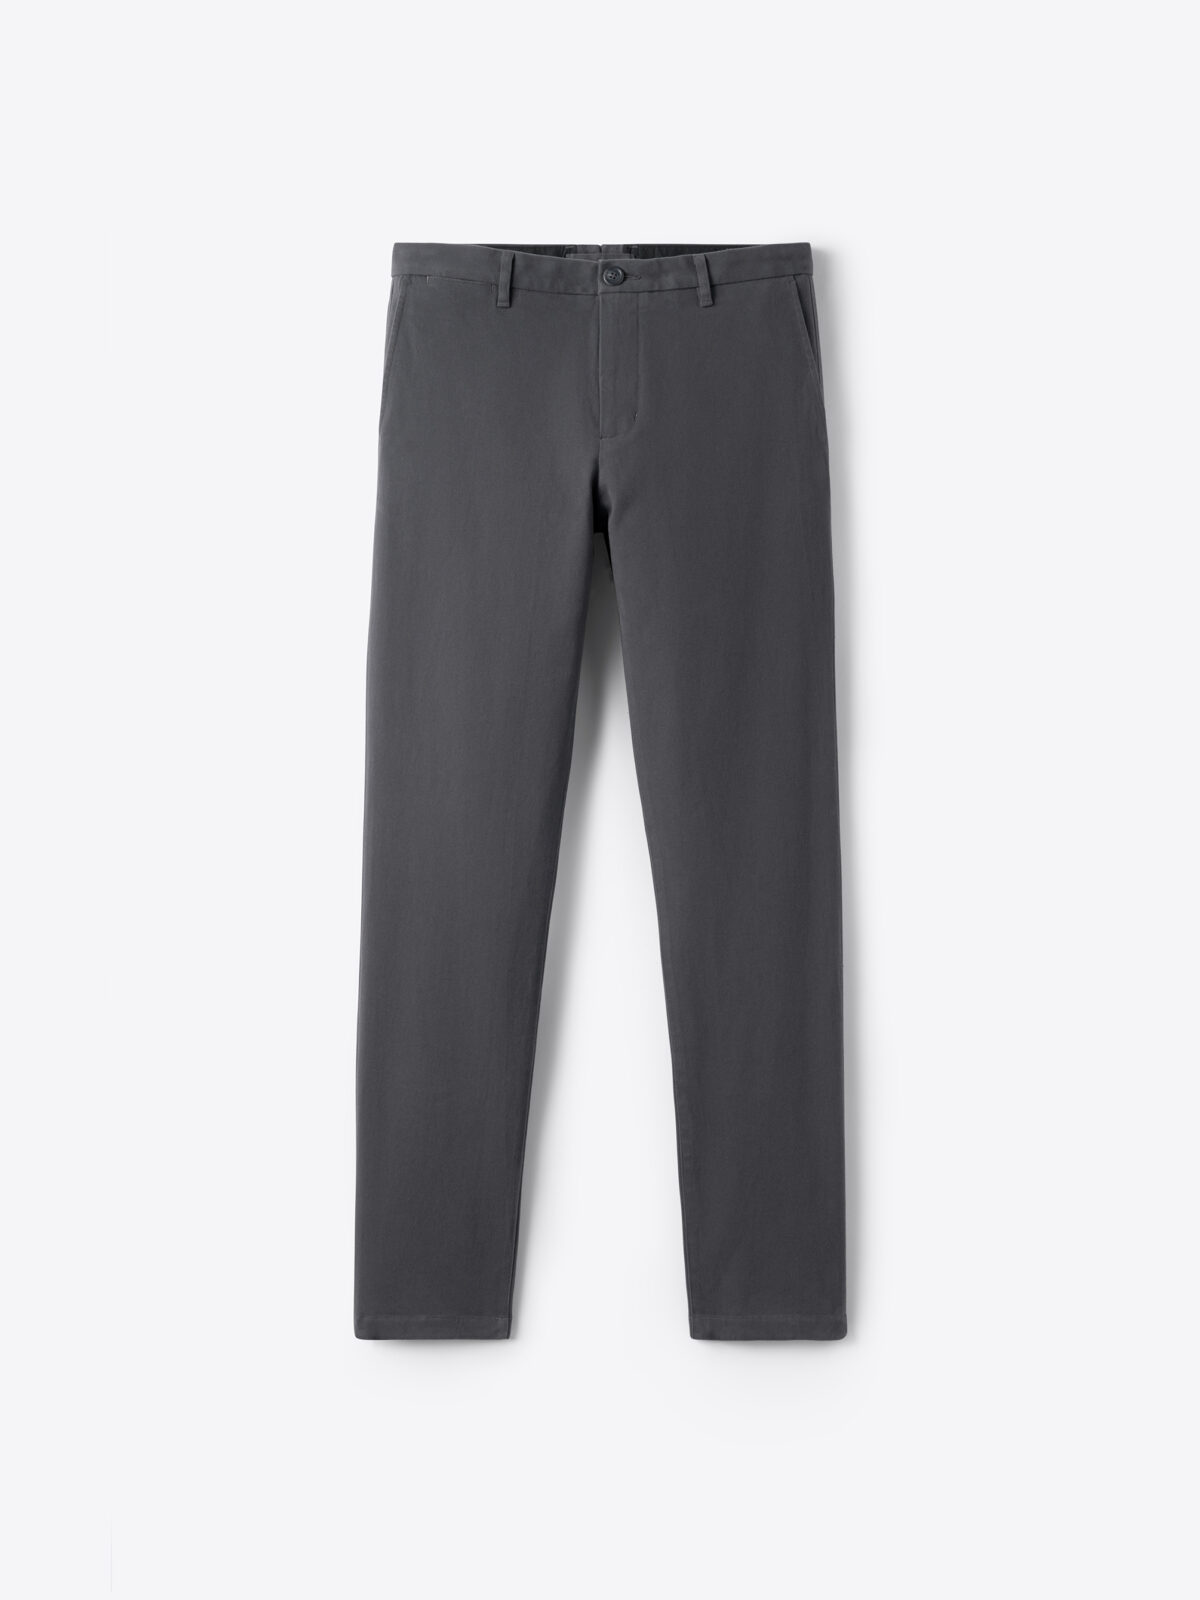 A pair of chino pants that might quickly become your summer uniform because  they're lightweight but still keep you covered.